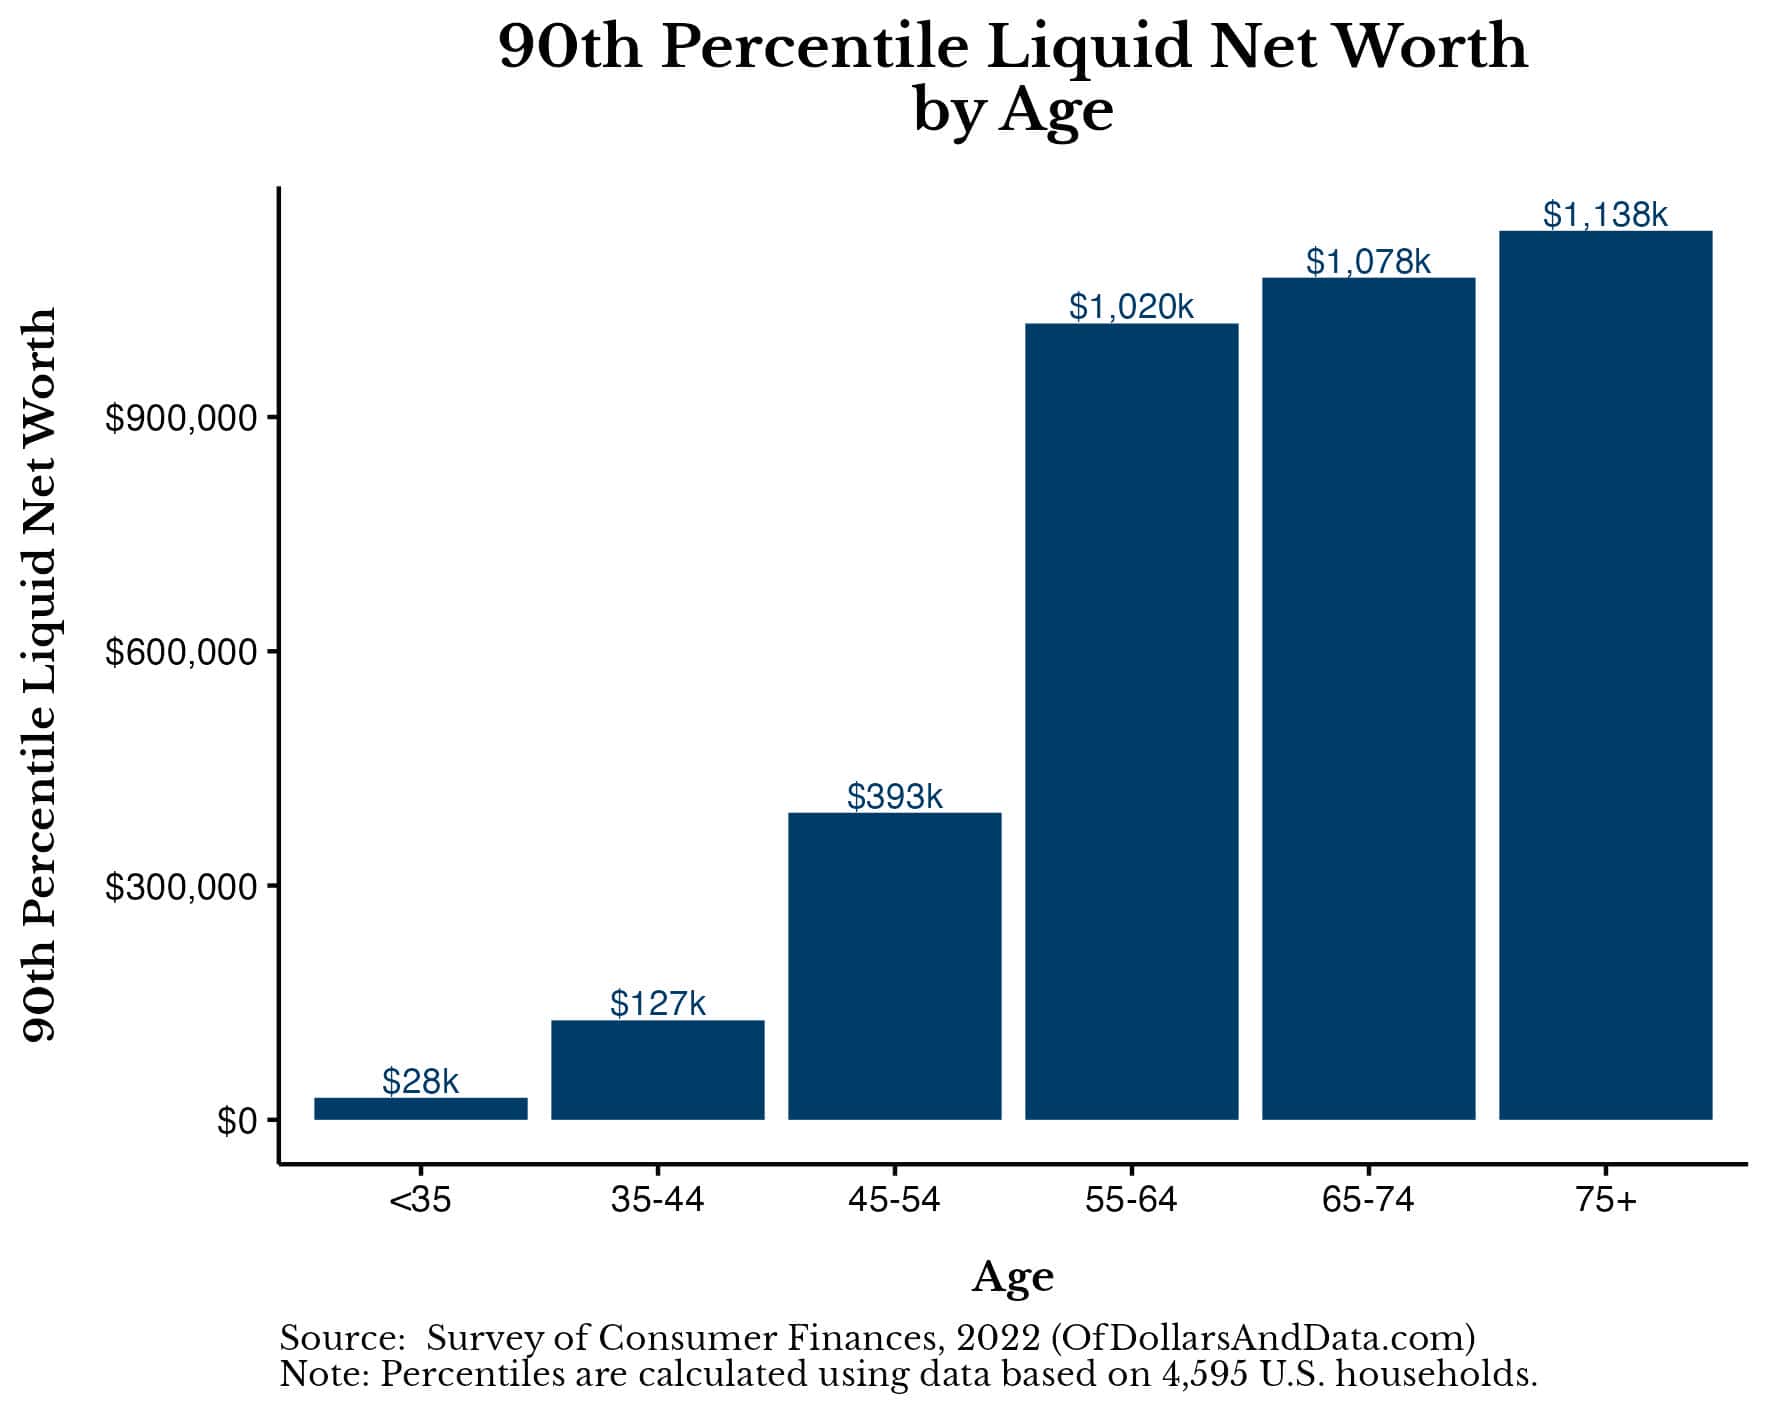 Chart showing median liquid net worth by age.